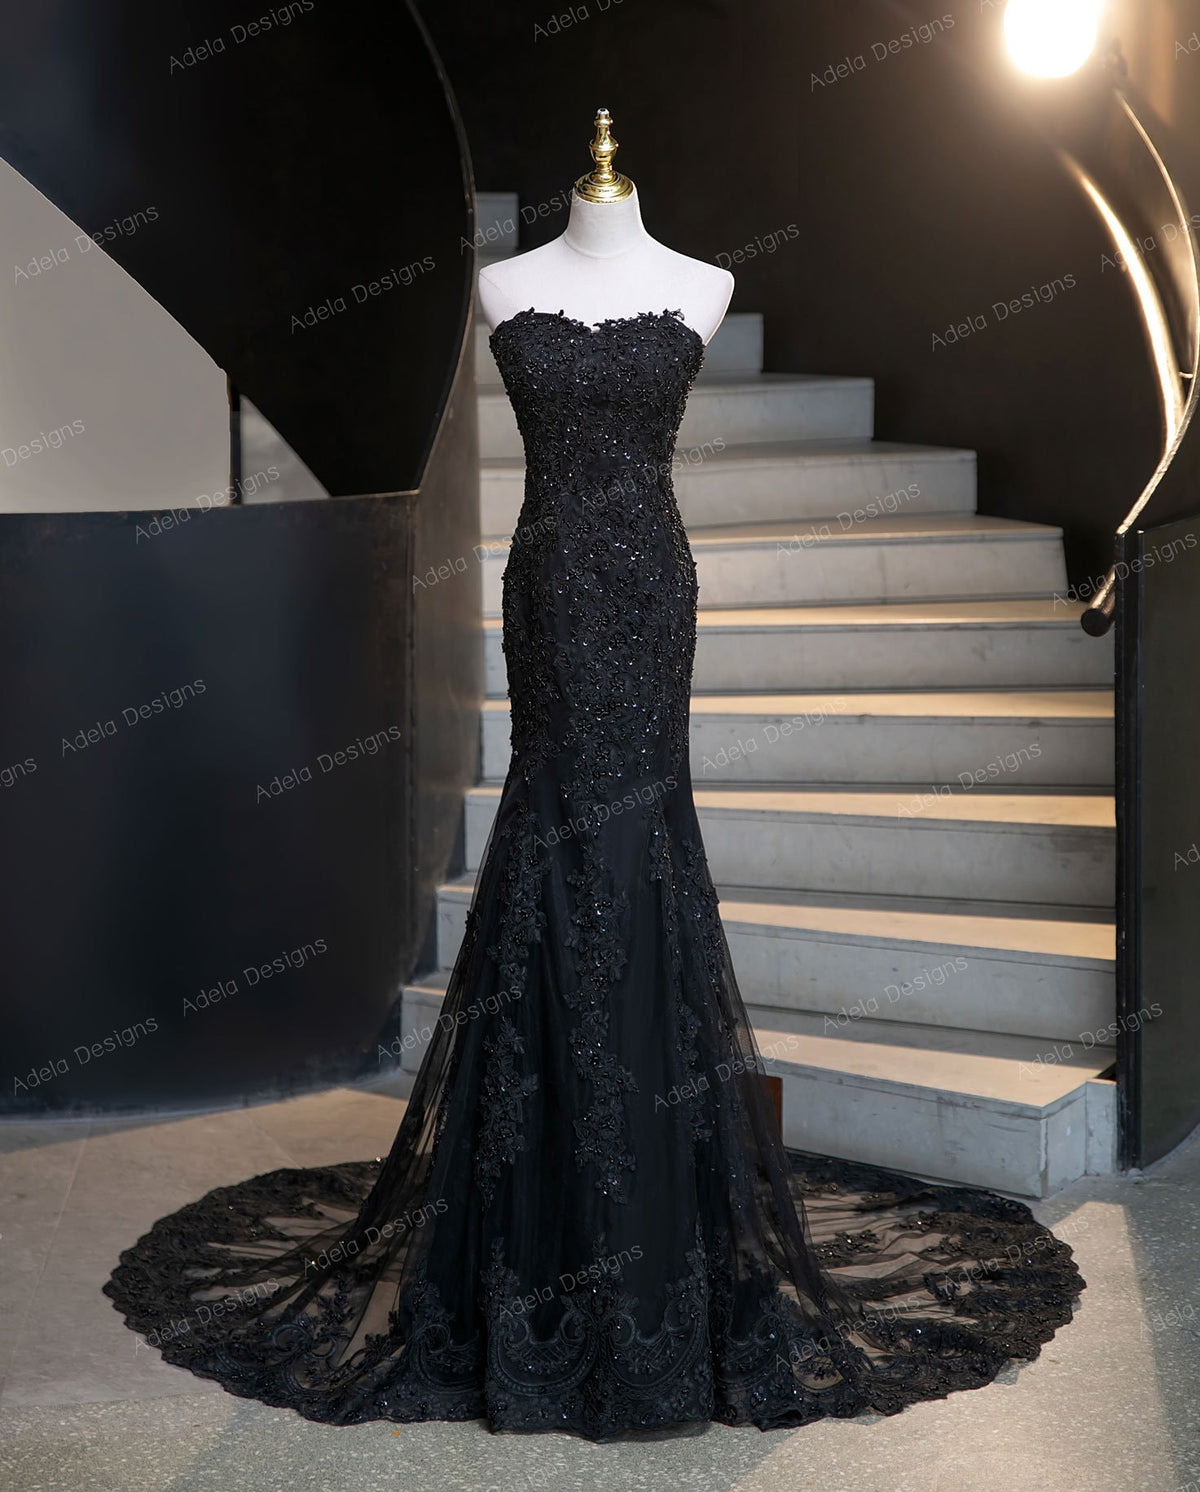 Gothic Black Lace Fit and Flare Fitted Sleeveless Strapless Wedding Dress Bridal Gown Sweetheart Neckline Open Back Lace with High Cape